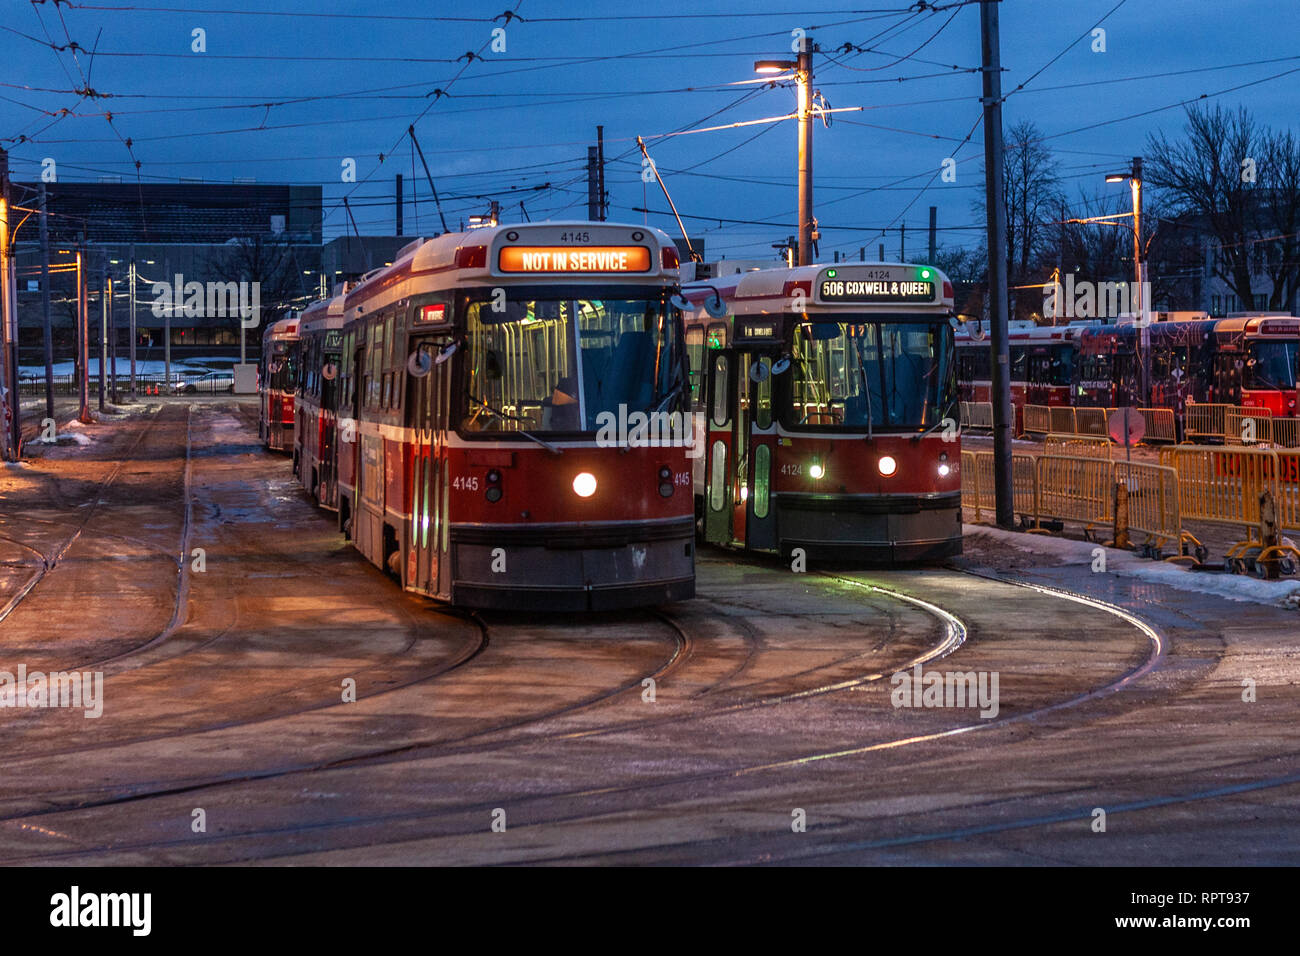 Classical streetcars in downtown Toronto, Lesliewille depo with view of overhead wiring and trolley poles. Busy urban landscape - Image Stock Photo